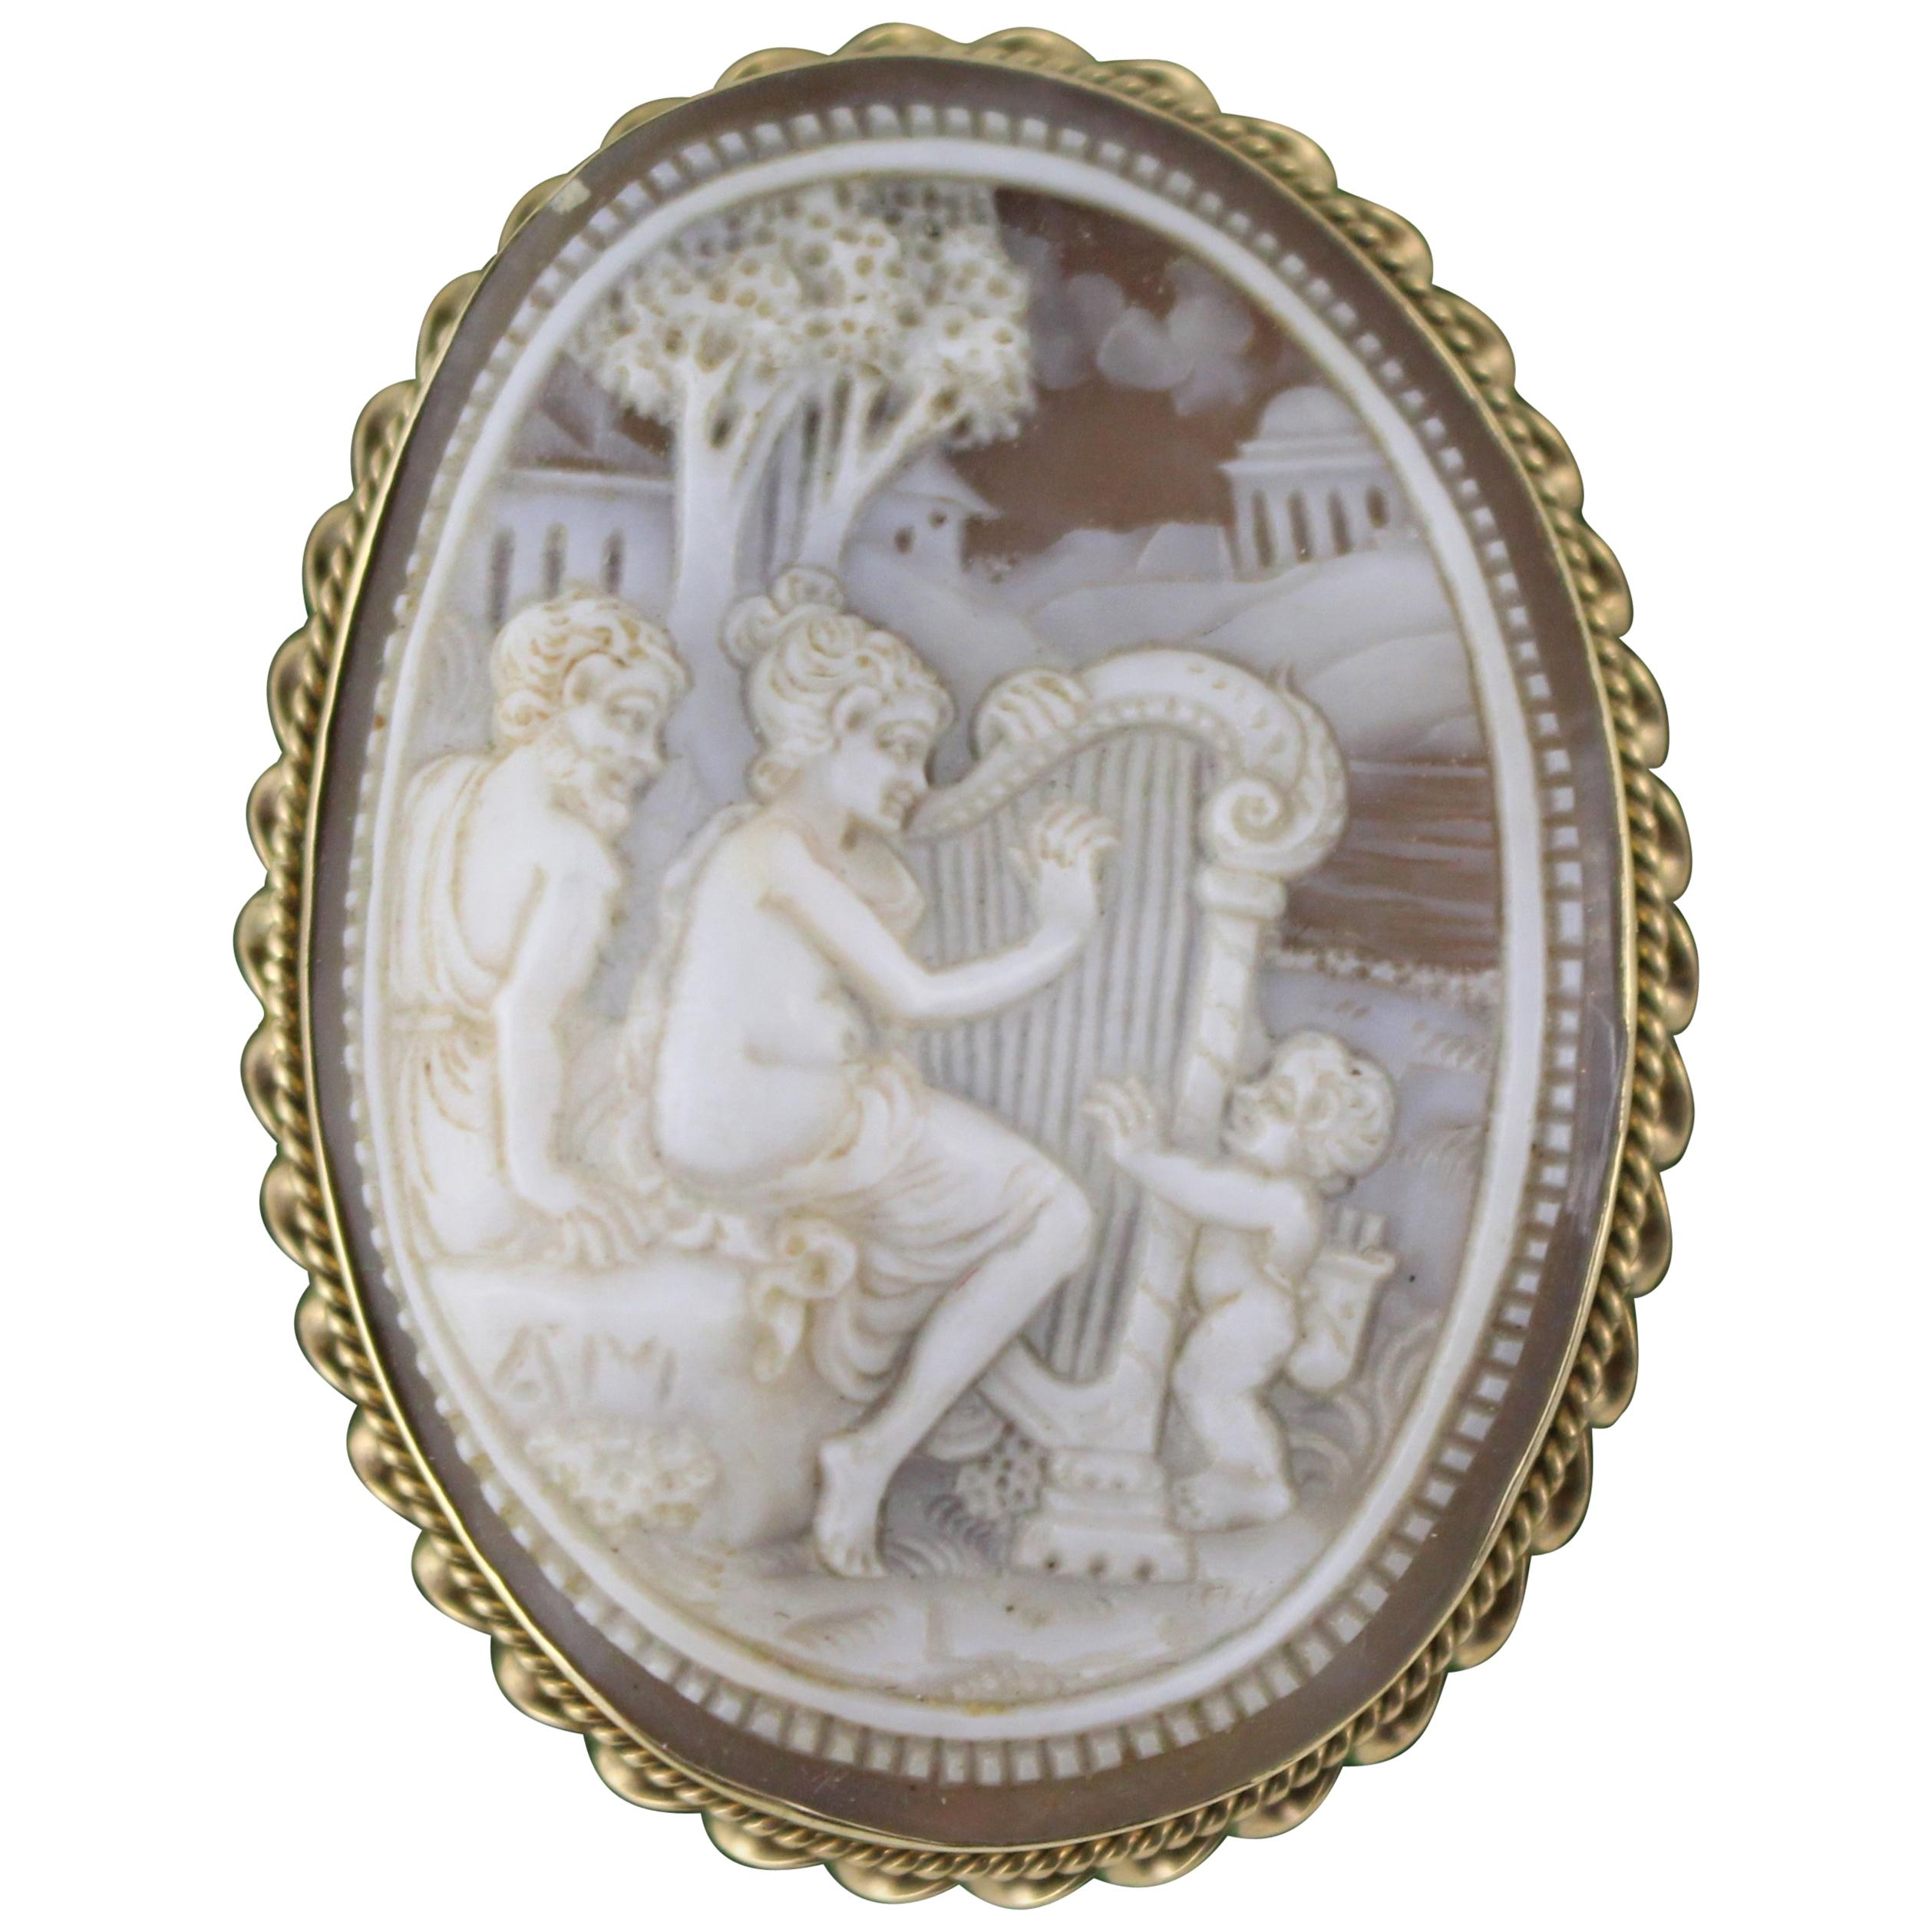 Carved Cameo Relief Gold Set Brooch